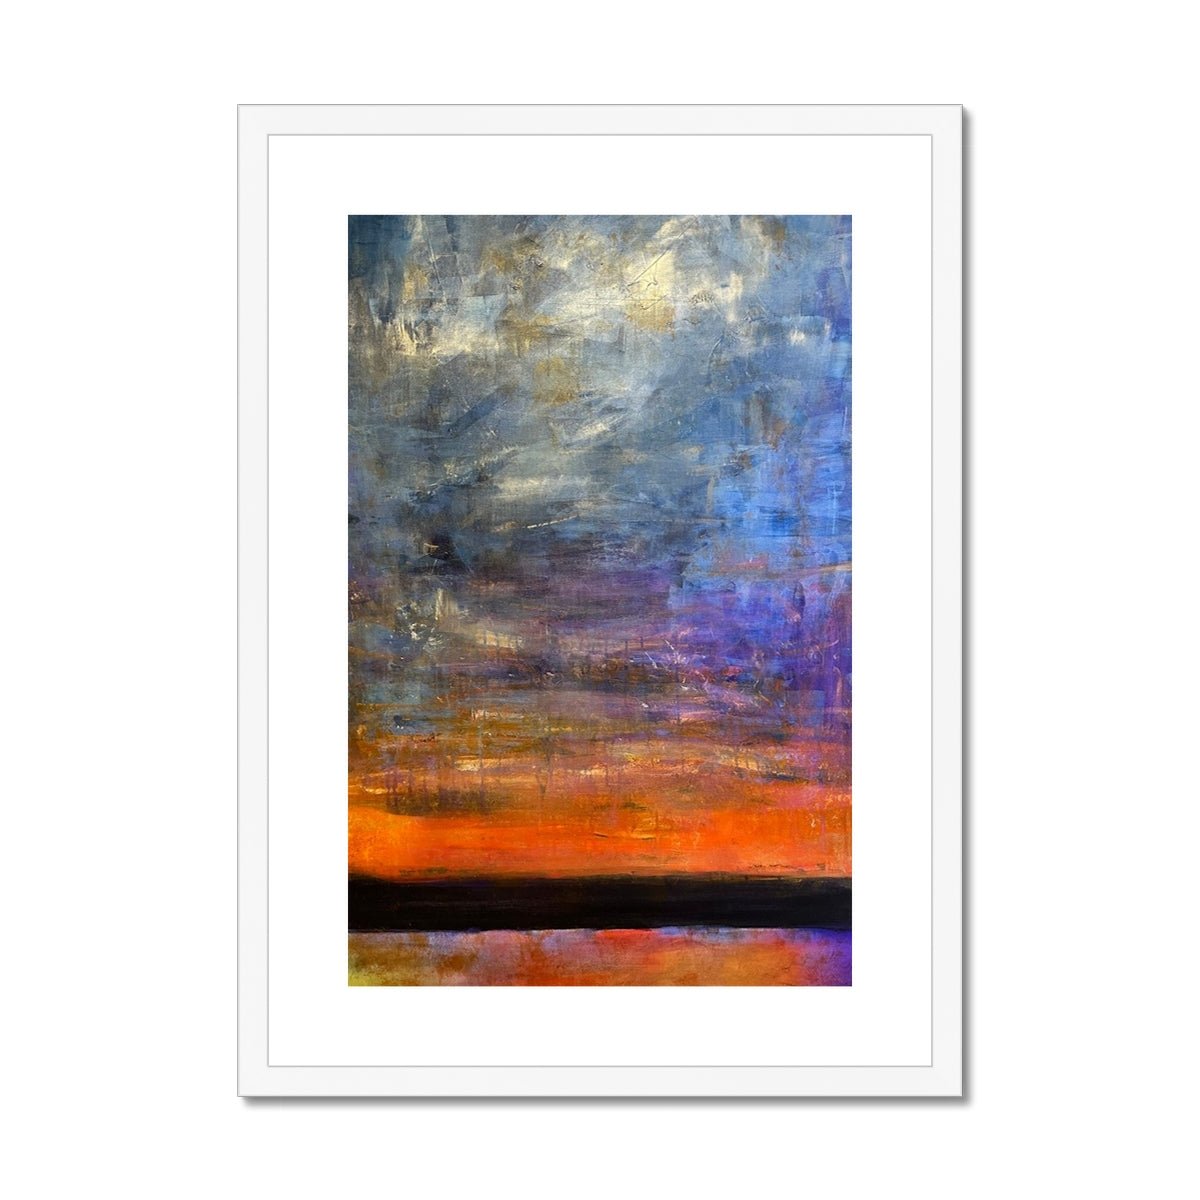 Horizon Dreams Abstract Painting | Framed & Mounted Prints From Scotland-Framed & Mounted Prints-Abstract & Impressionistic Art Gallery-A2 Portrait-White Frame-Paintings, Prints, Homeware, Art Gifts From Scotland By Scottish Artist Kevin Hunter